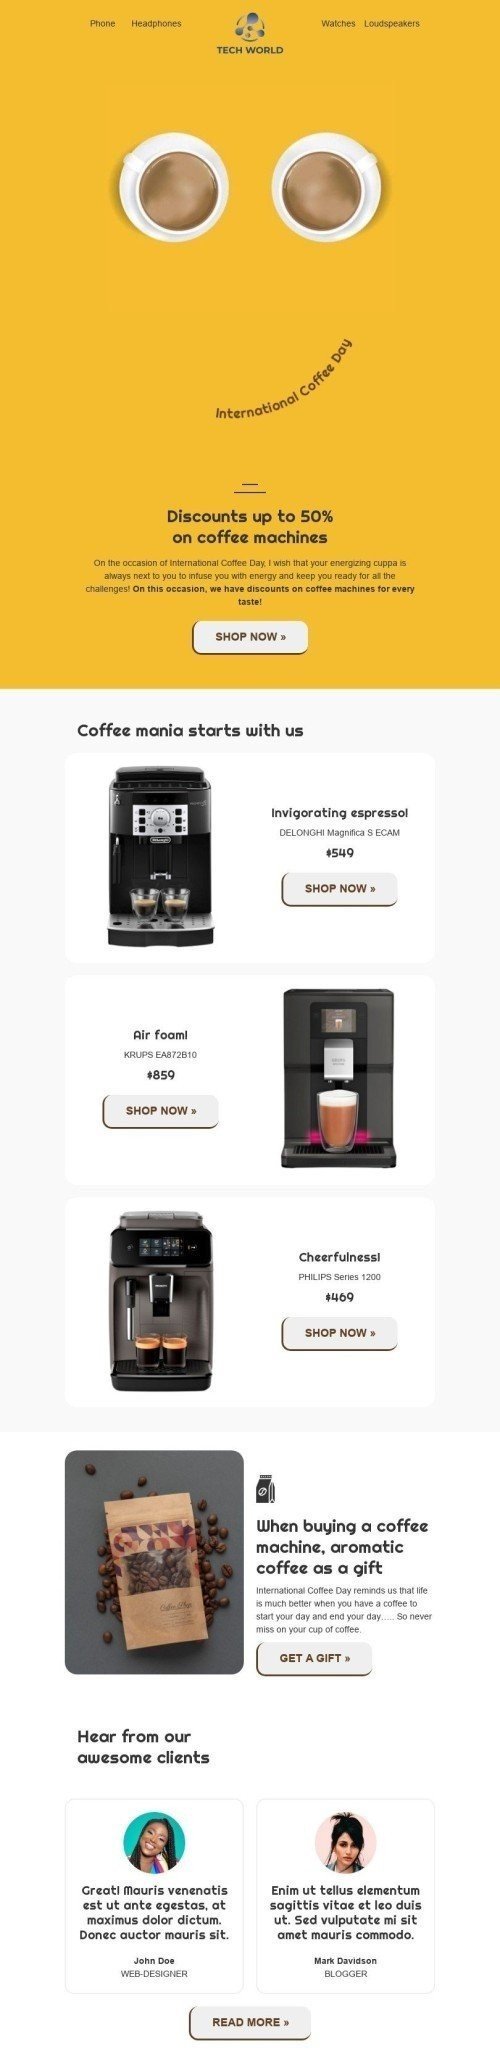 International Coffee Day Email Template "Coffee smile" for Gadgets industry desktop view